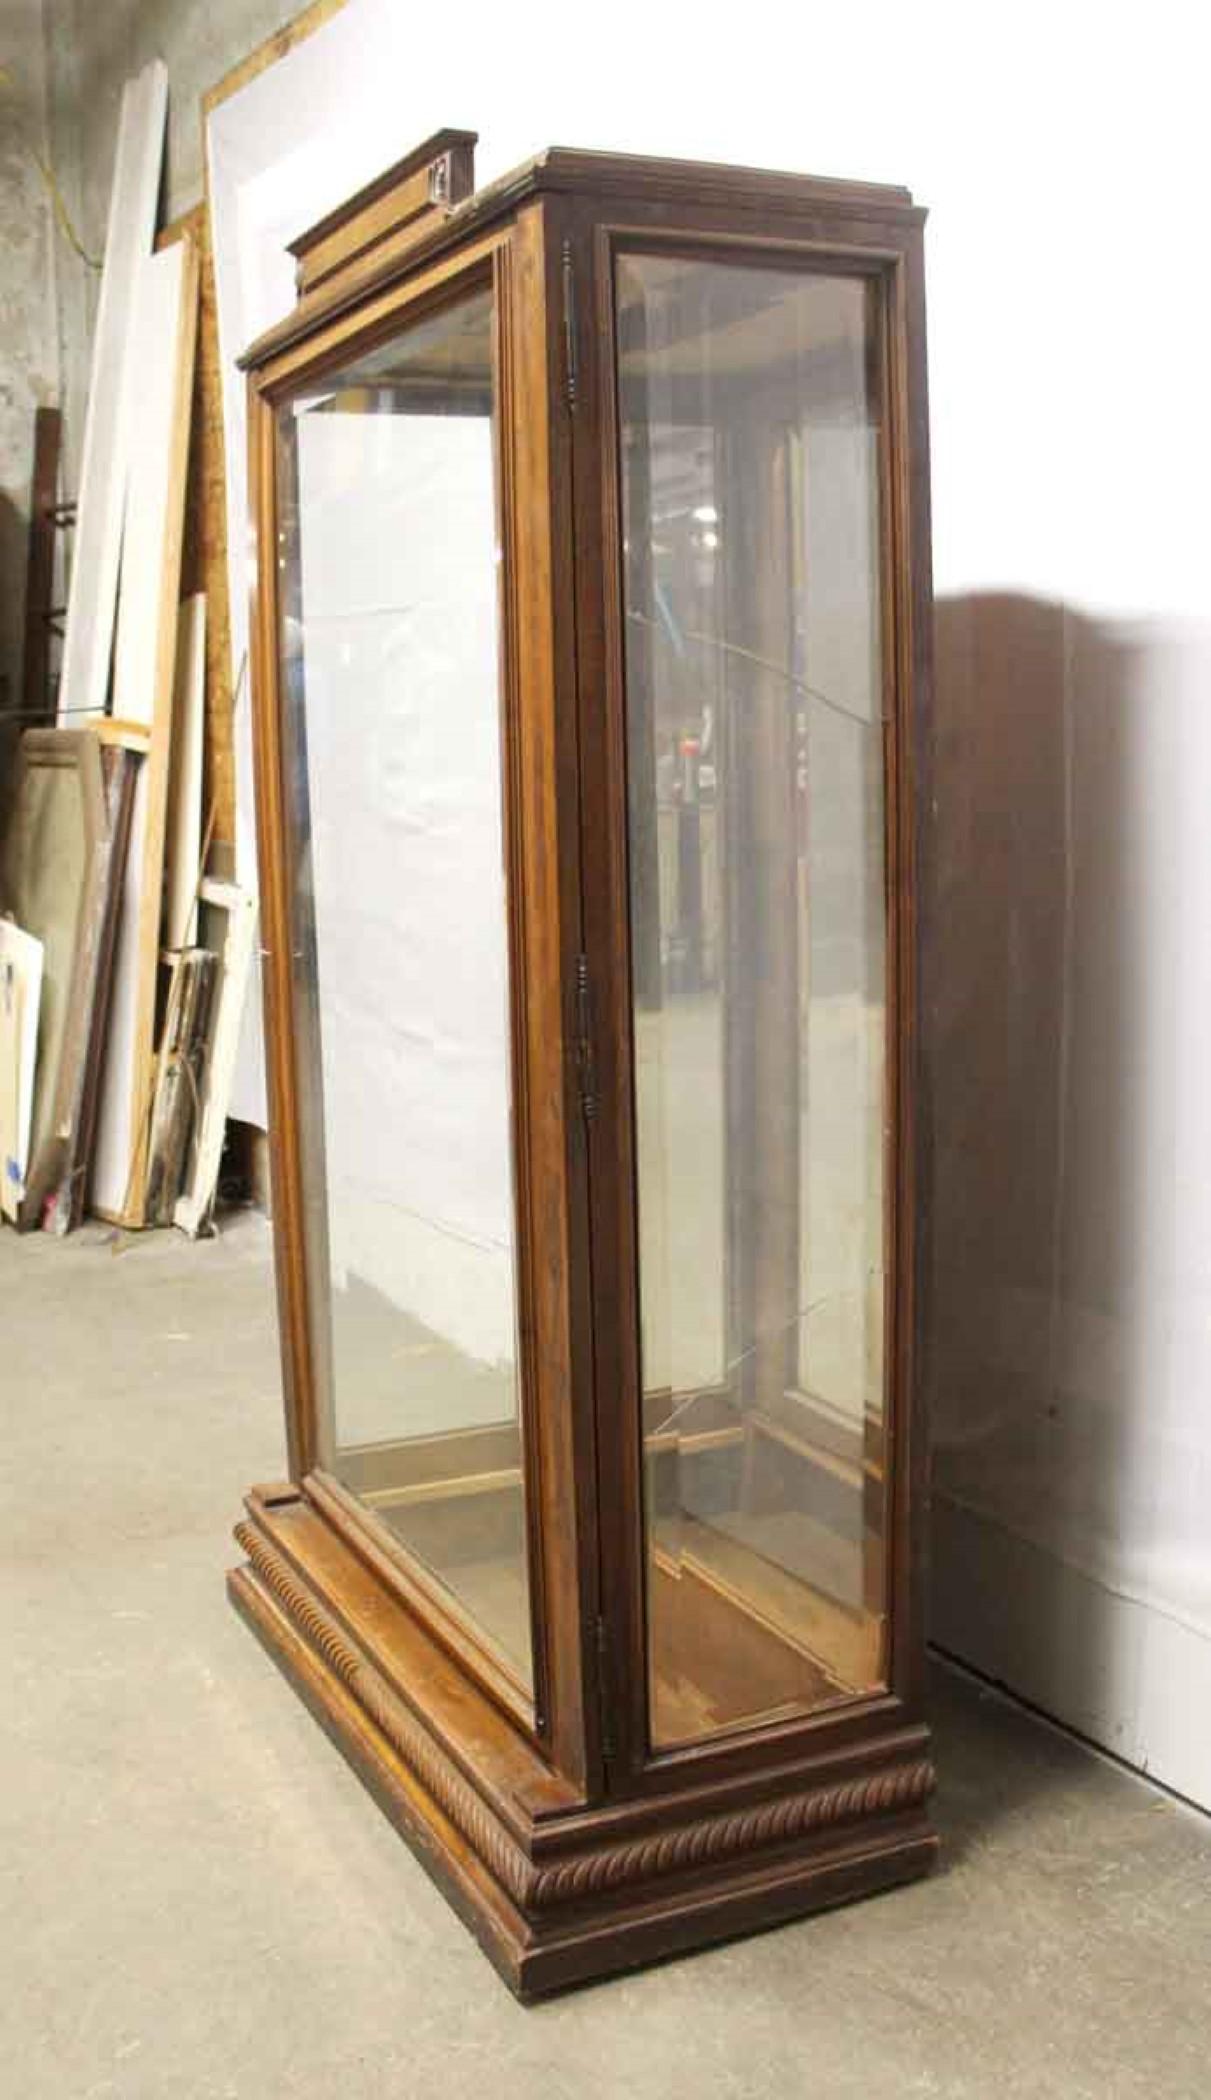 Early 20th century dark stained wood showcase featuring a beveled glass front door, beveled glass sides and a mirrored back. New glass shelves included. Also comes with key for the front door lock. Please note, this item is located in one of our NYC